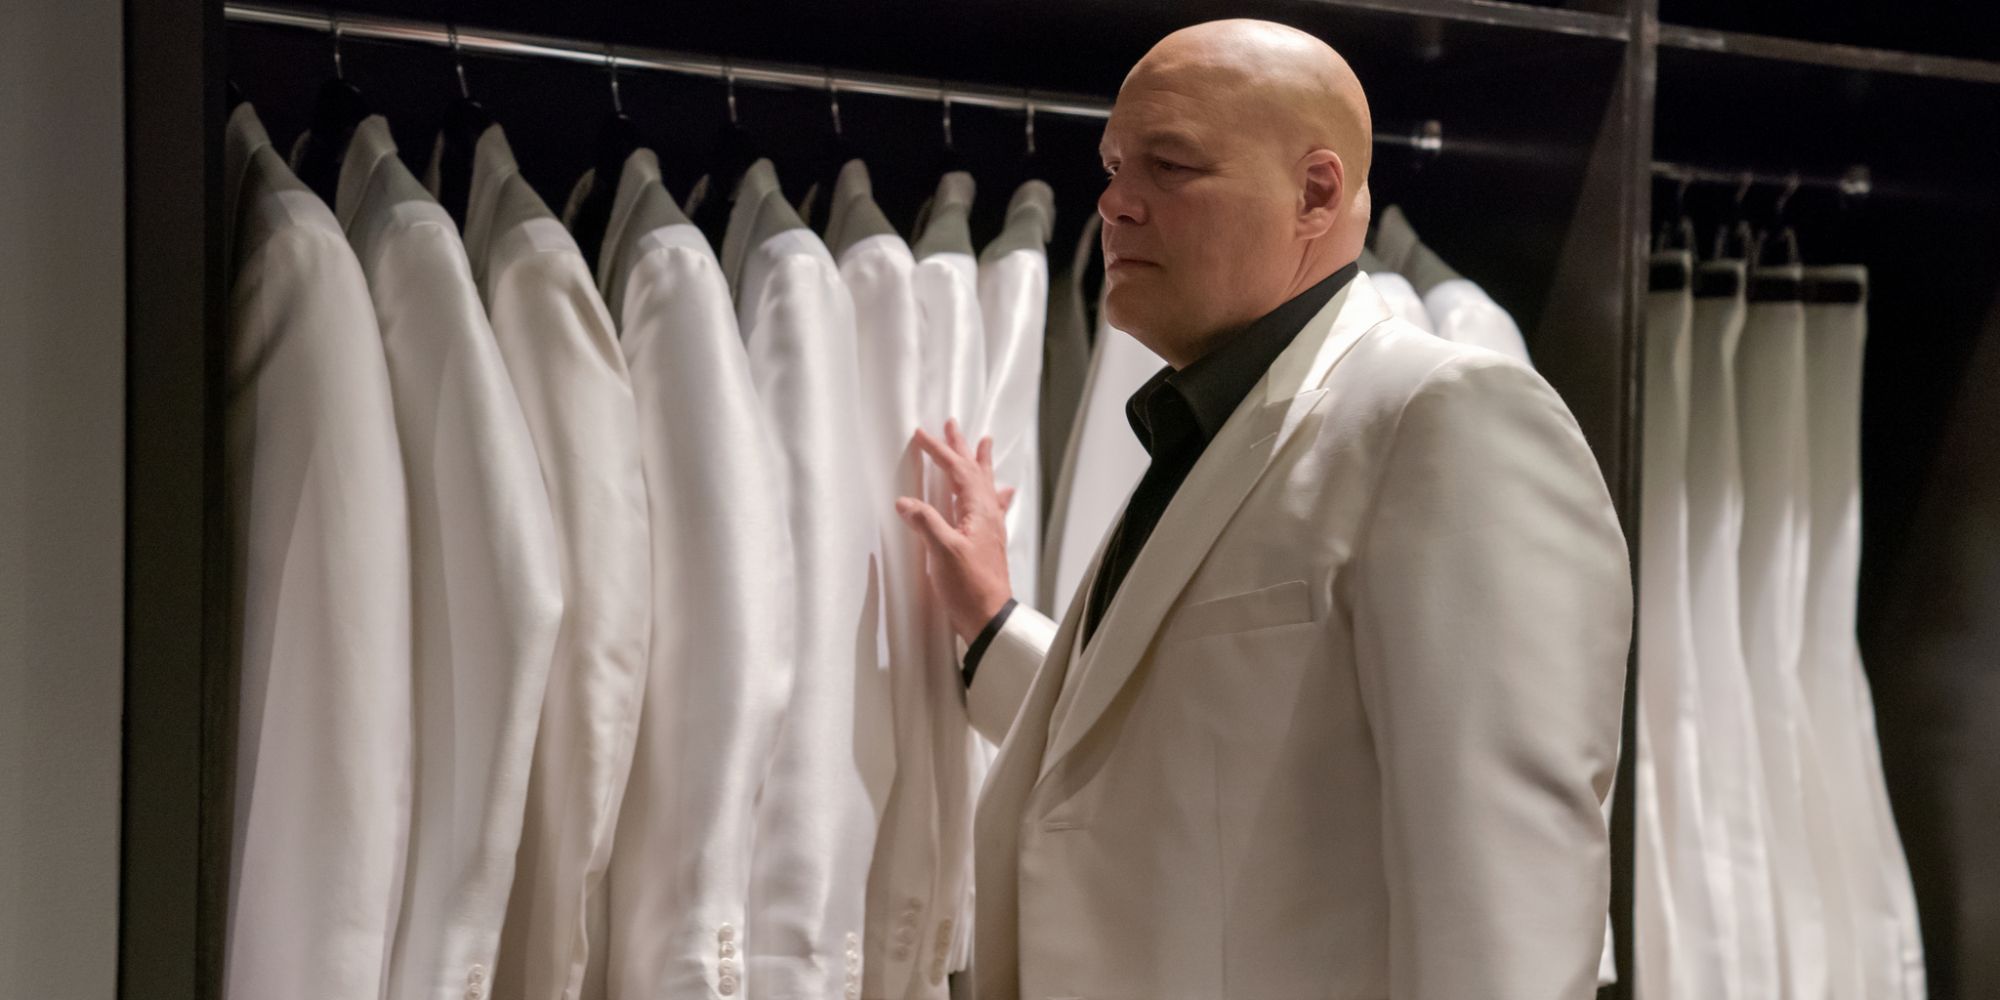 Wilson Fisk (Vincent D'Onofrio) touches several suits from Daredevil in front of a white suit closet.